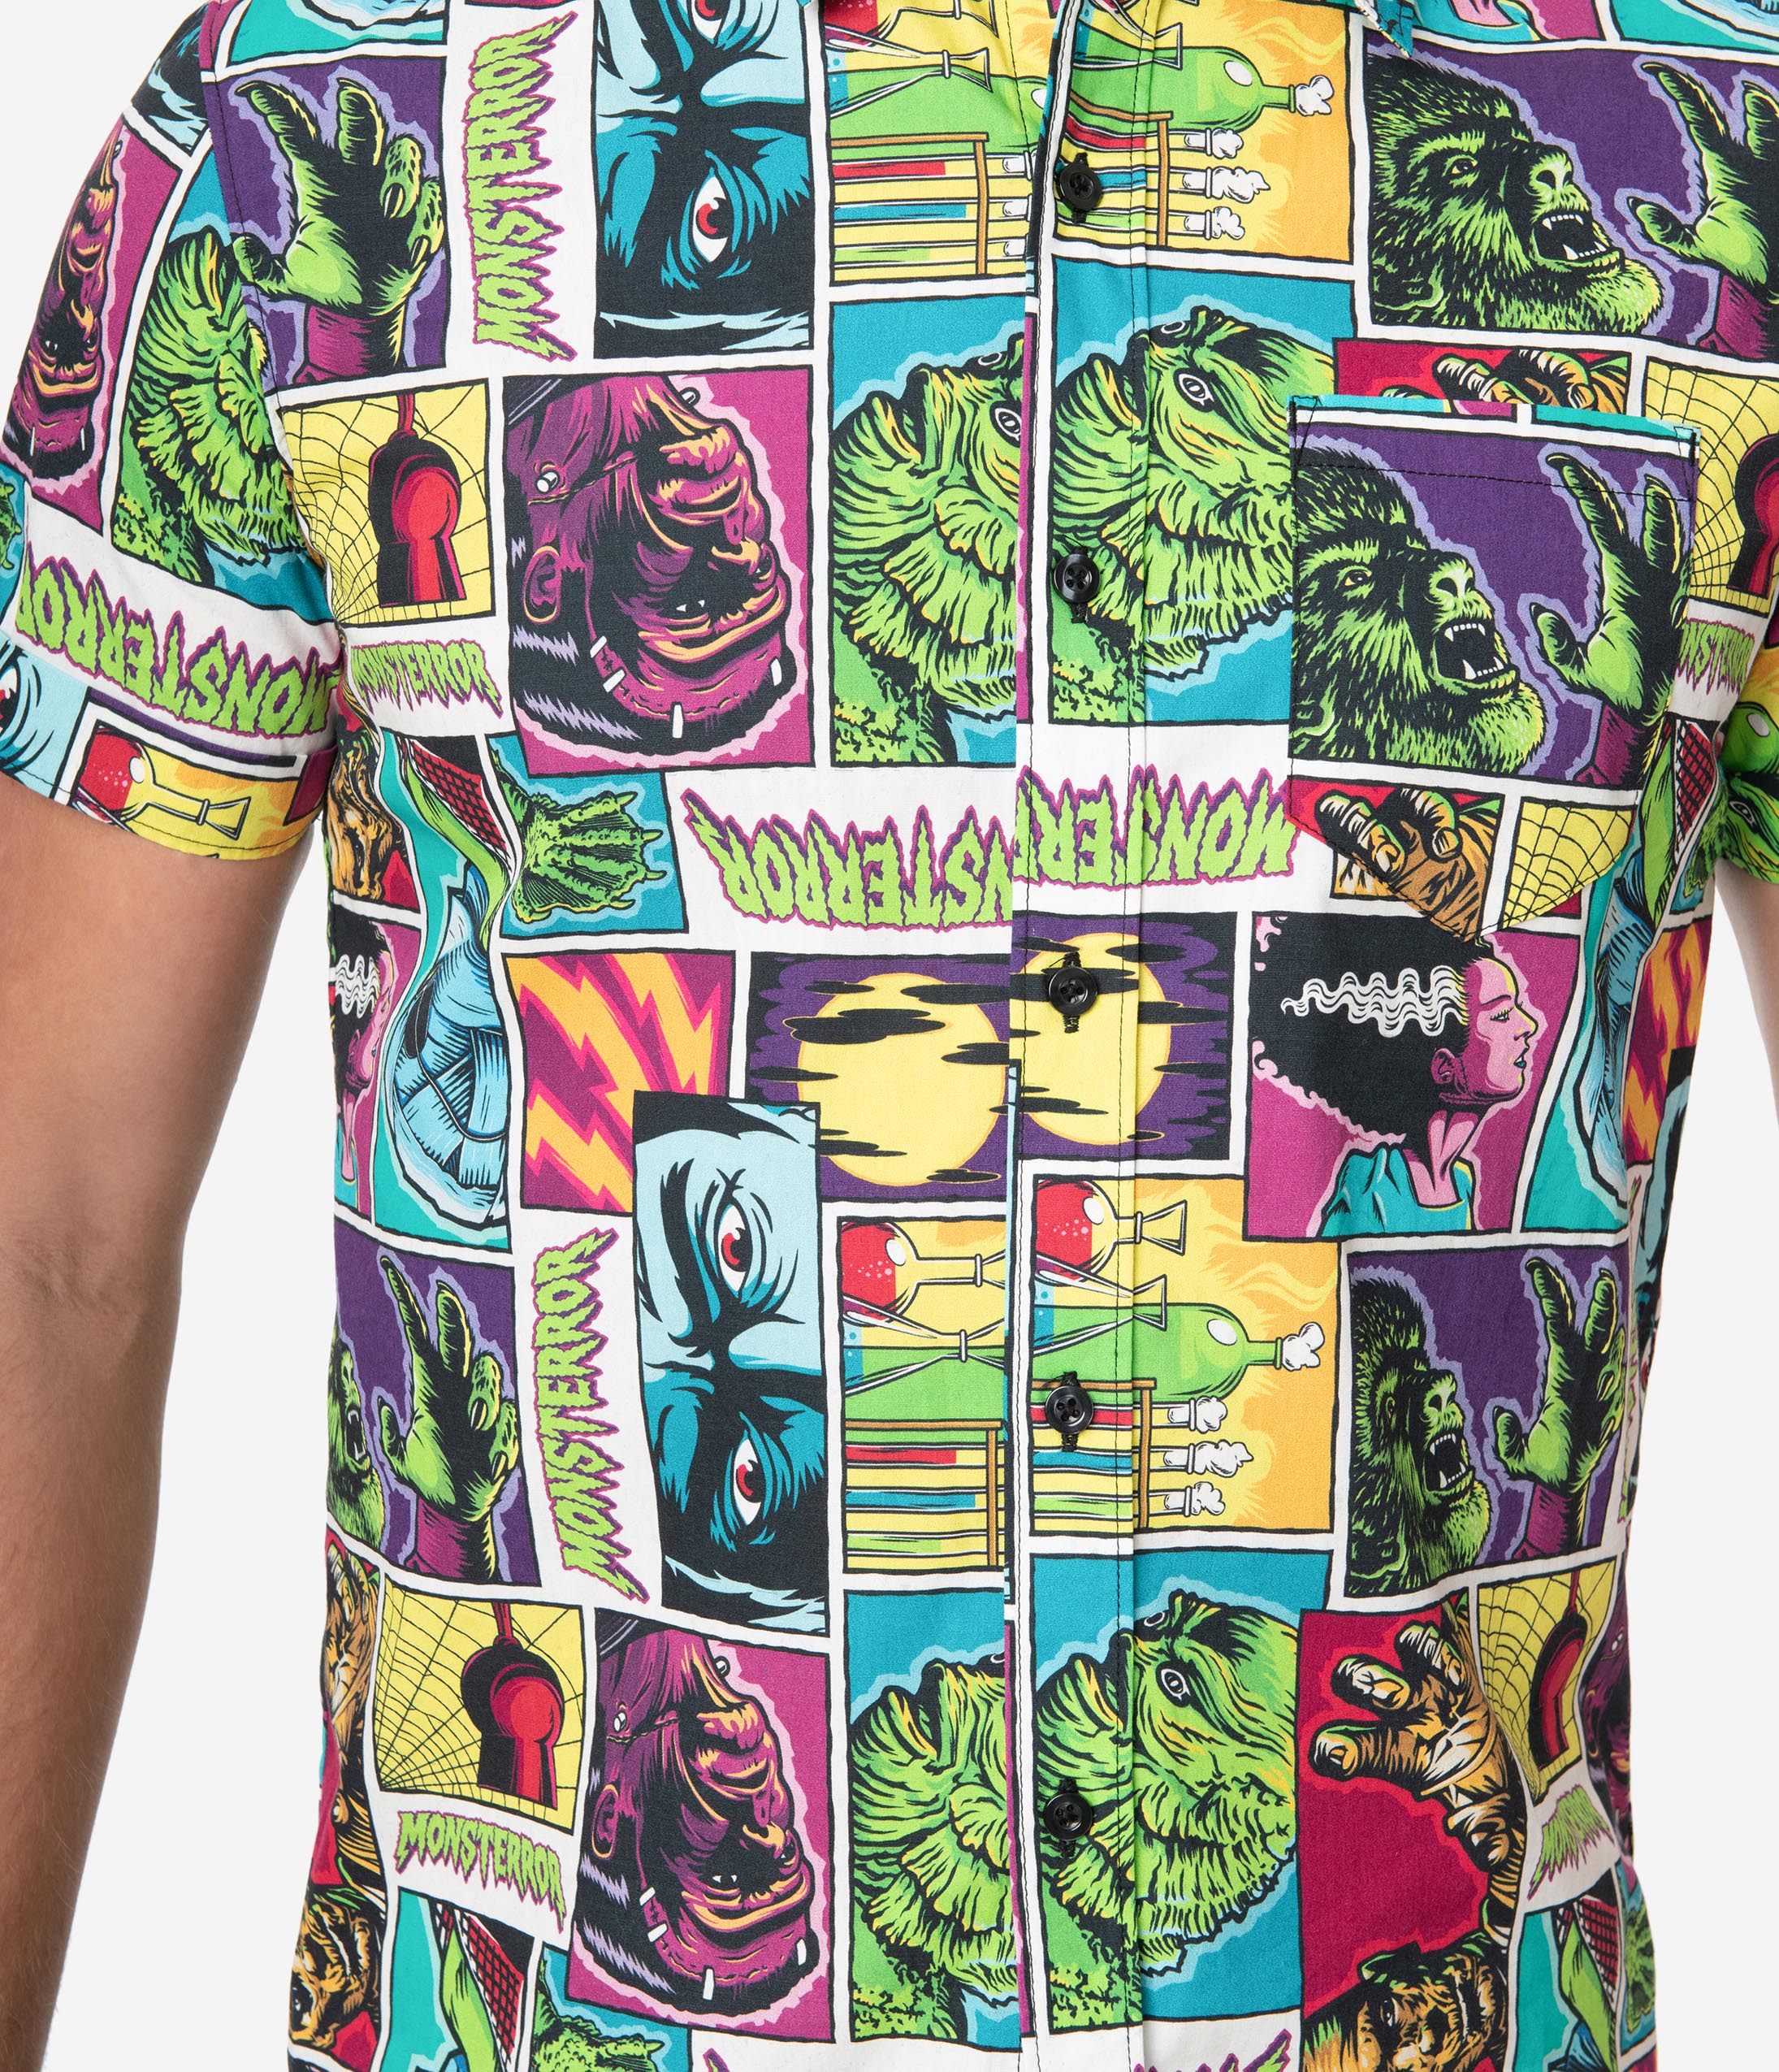 This is a Universal Monsters mens retro shirt by Unique Vintage, with Creature, Frankenstein, Dracula, Mummy, Bride, Wolfman and it has a collar short sleeves in green, purple, blue, yellow and red.